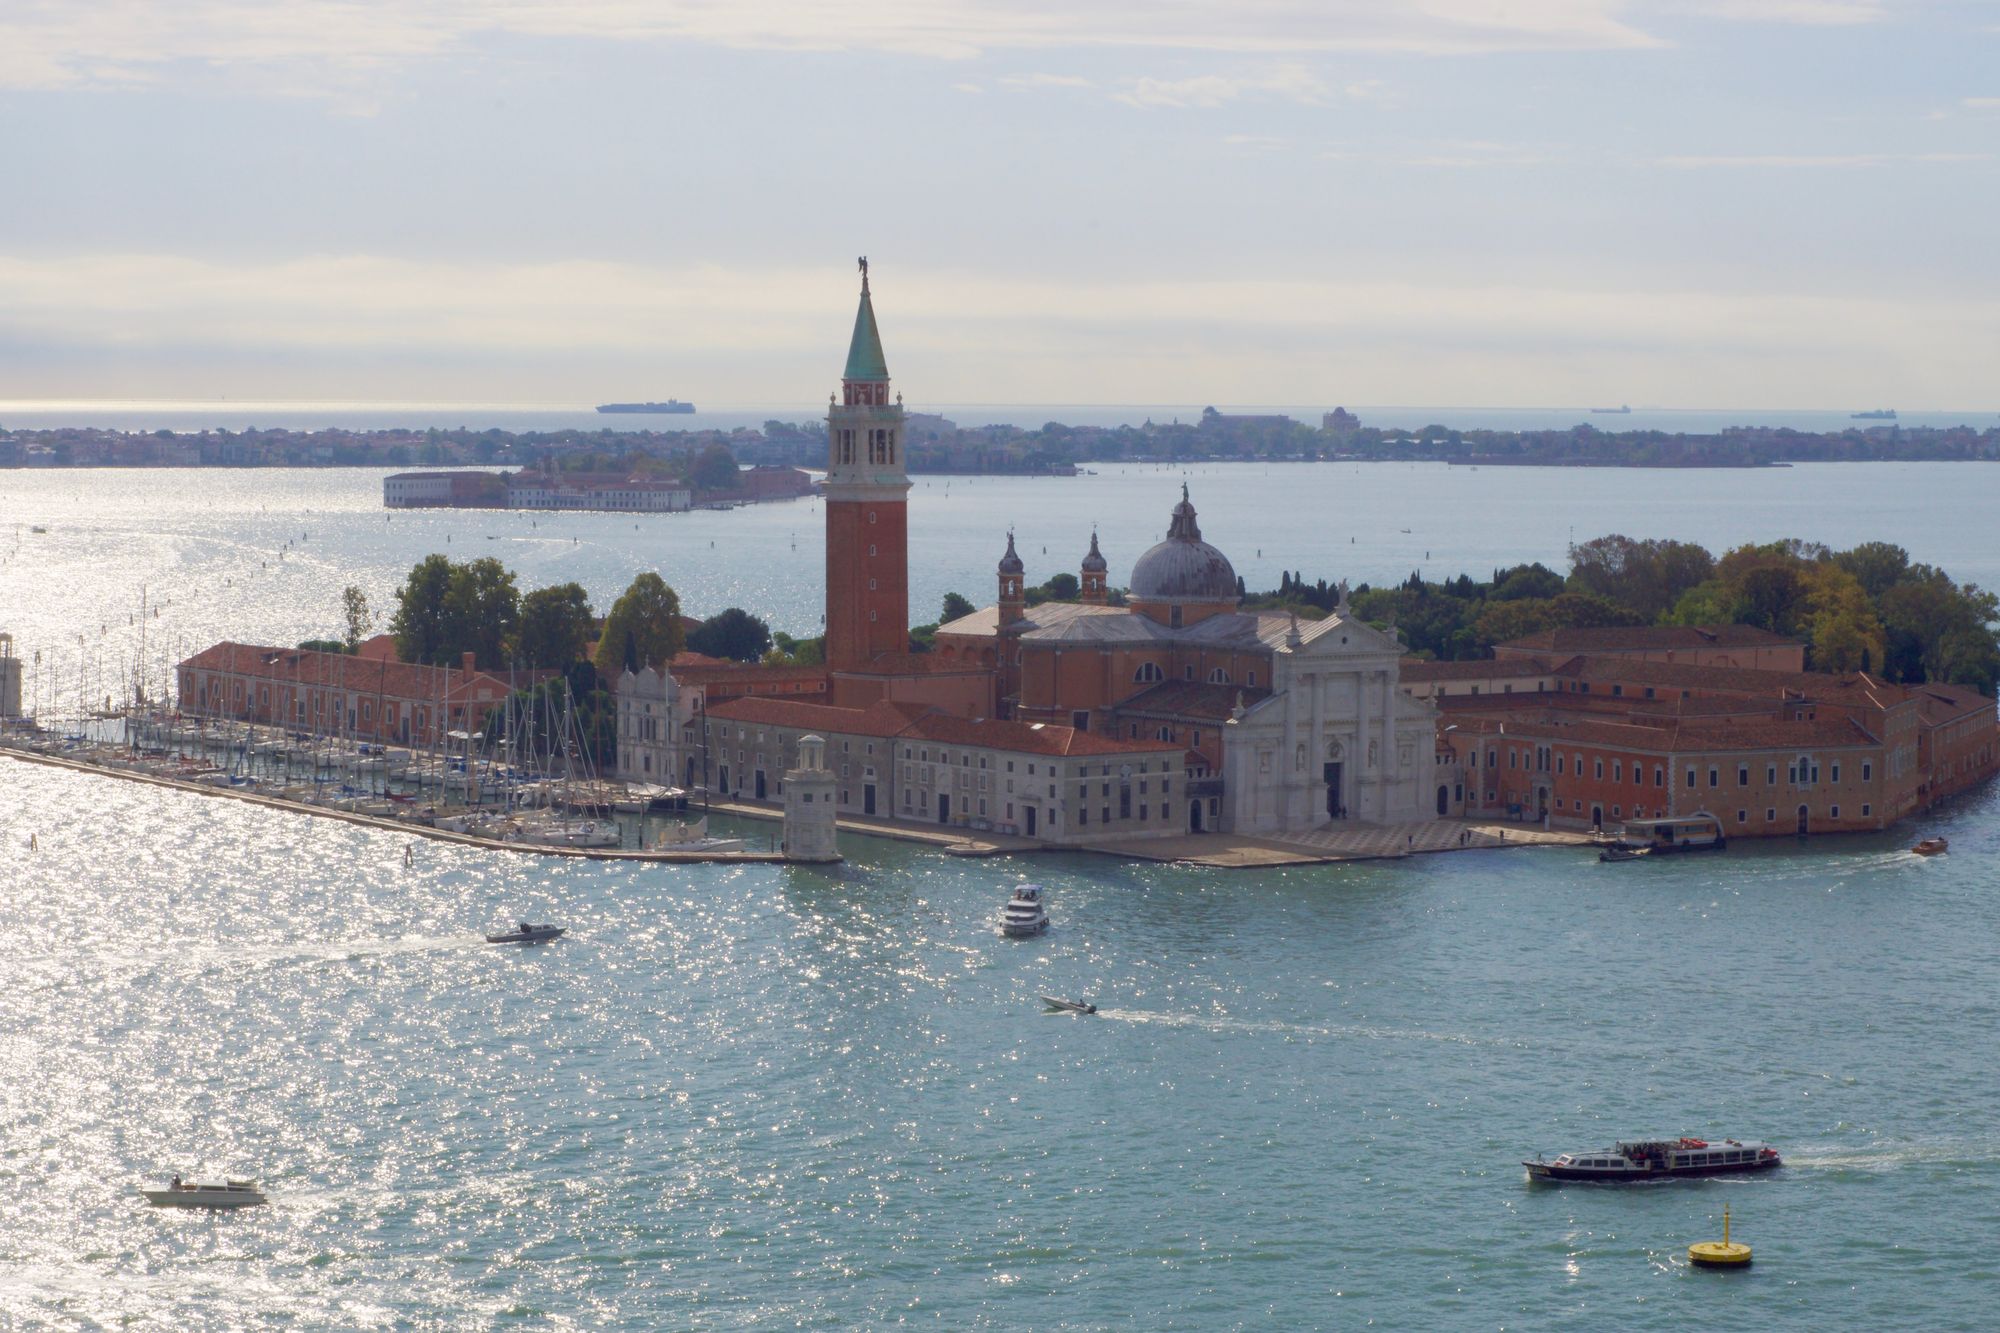 The island of San Giorgio Maggiore seen from a tower on a nearby island, the lagoon glimmering in the morning light as boats zip past, the terracotta of the church obstinate in the hazy light.